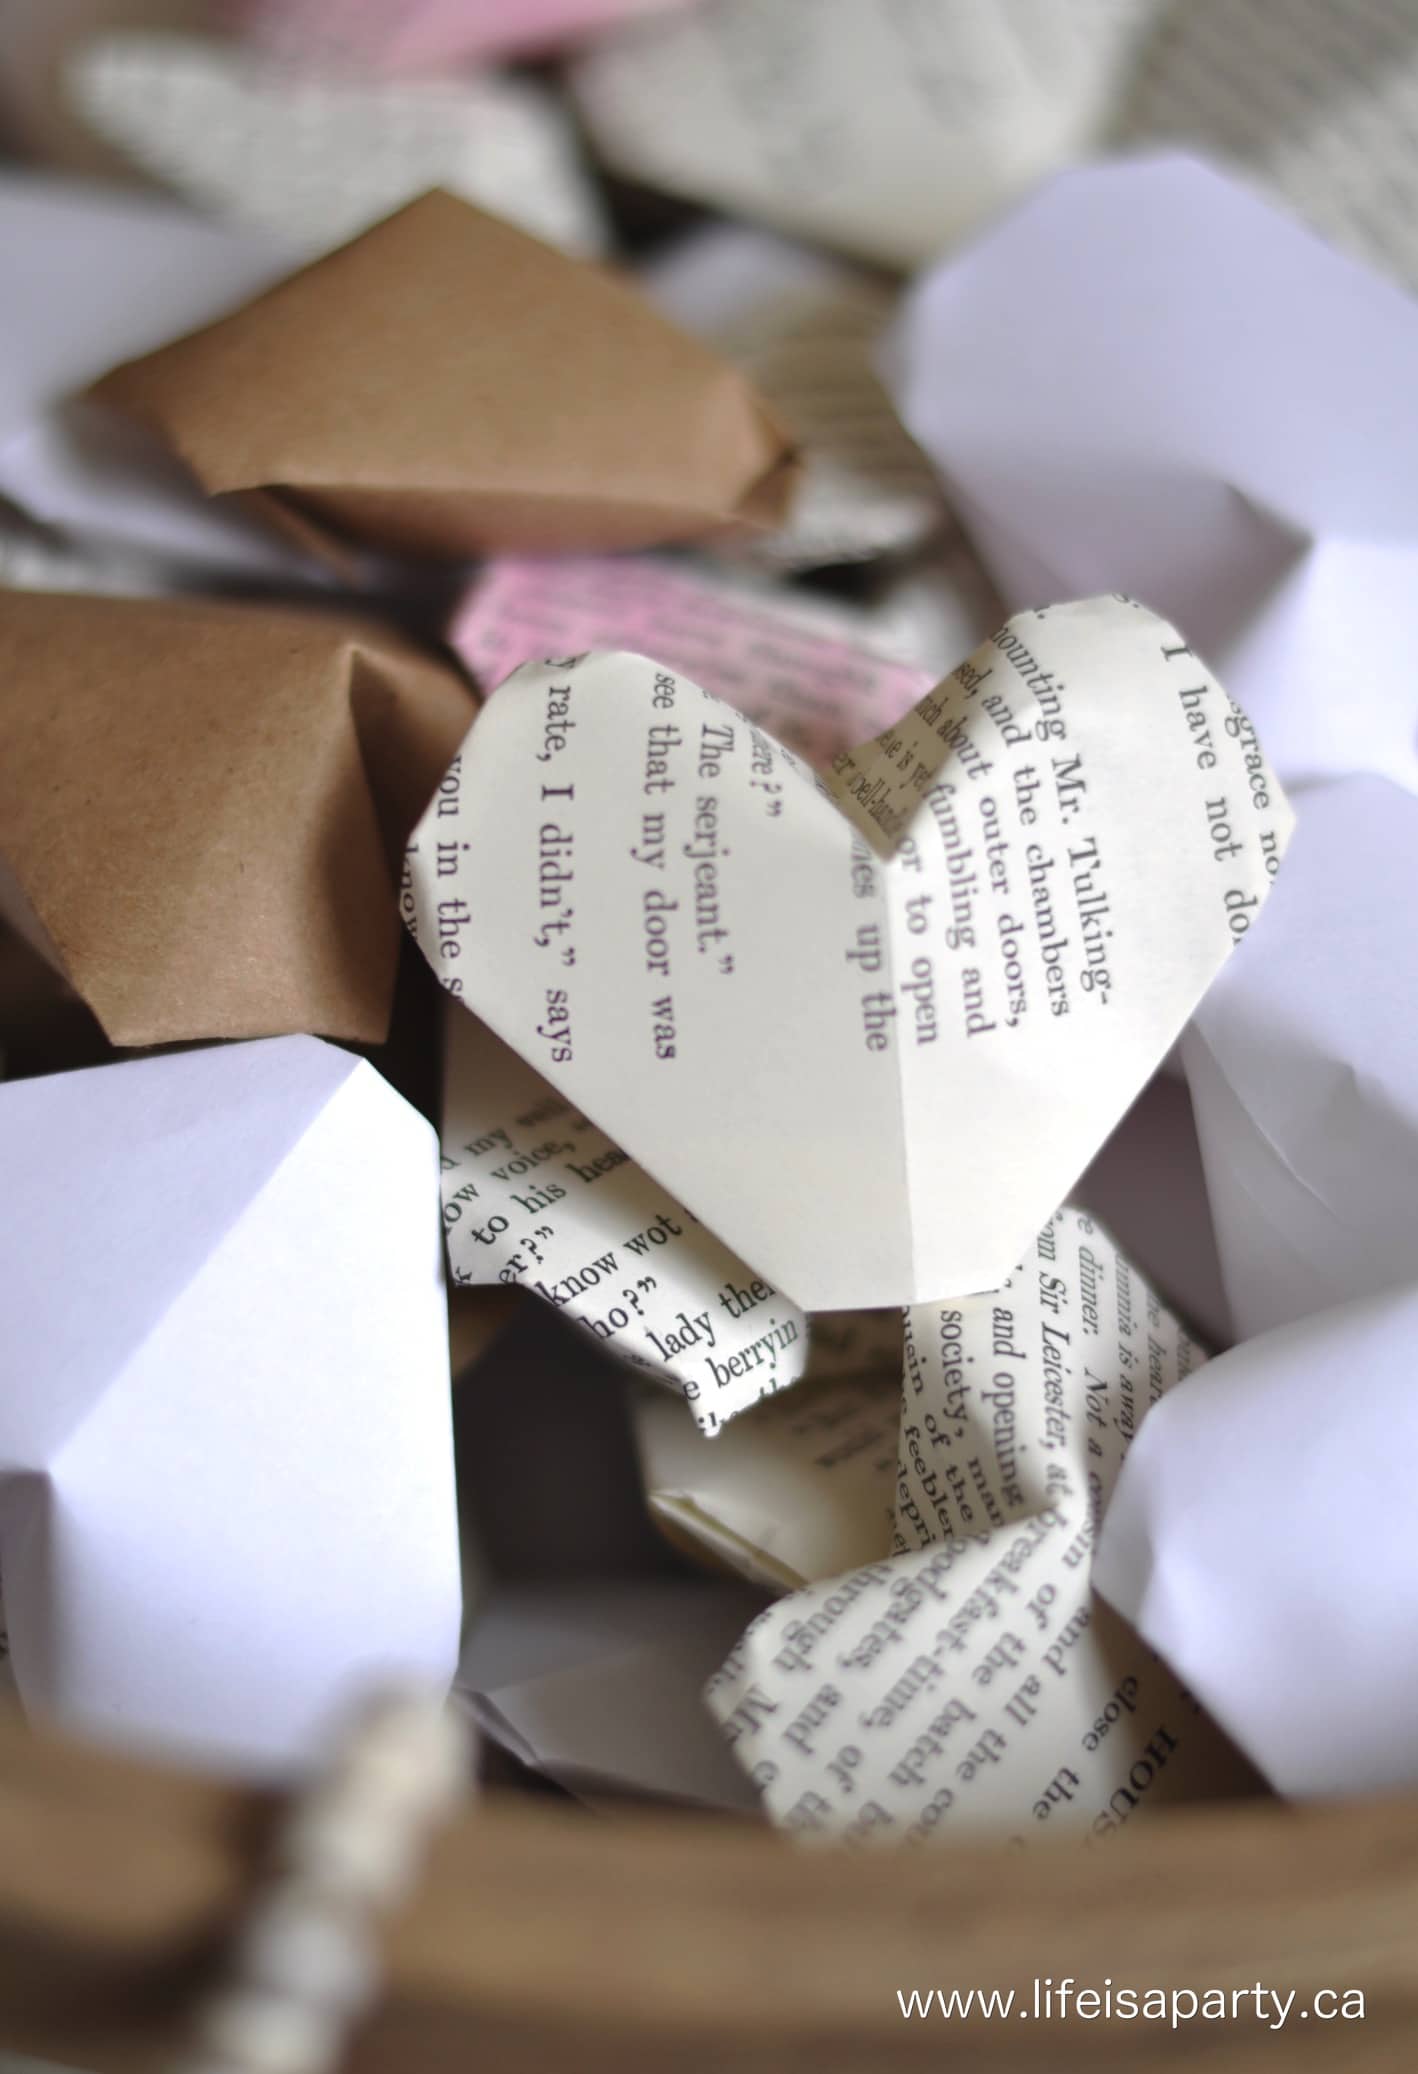 A 3d origami heart made from an old book page.